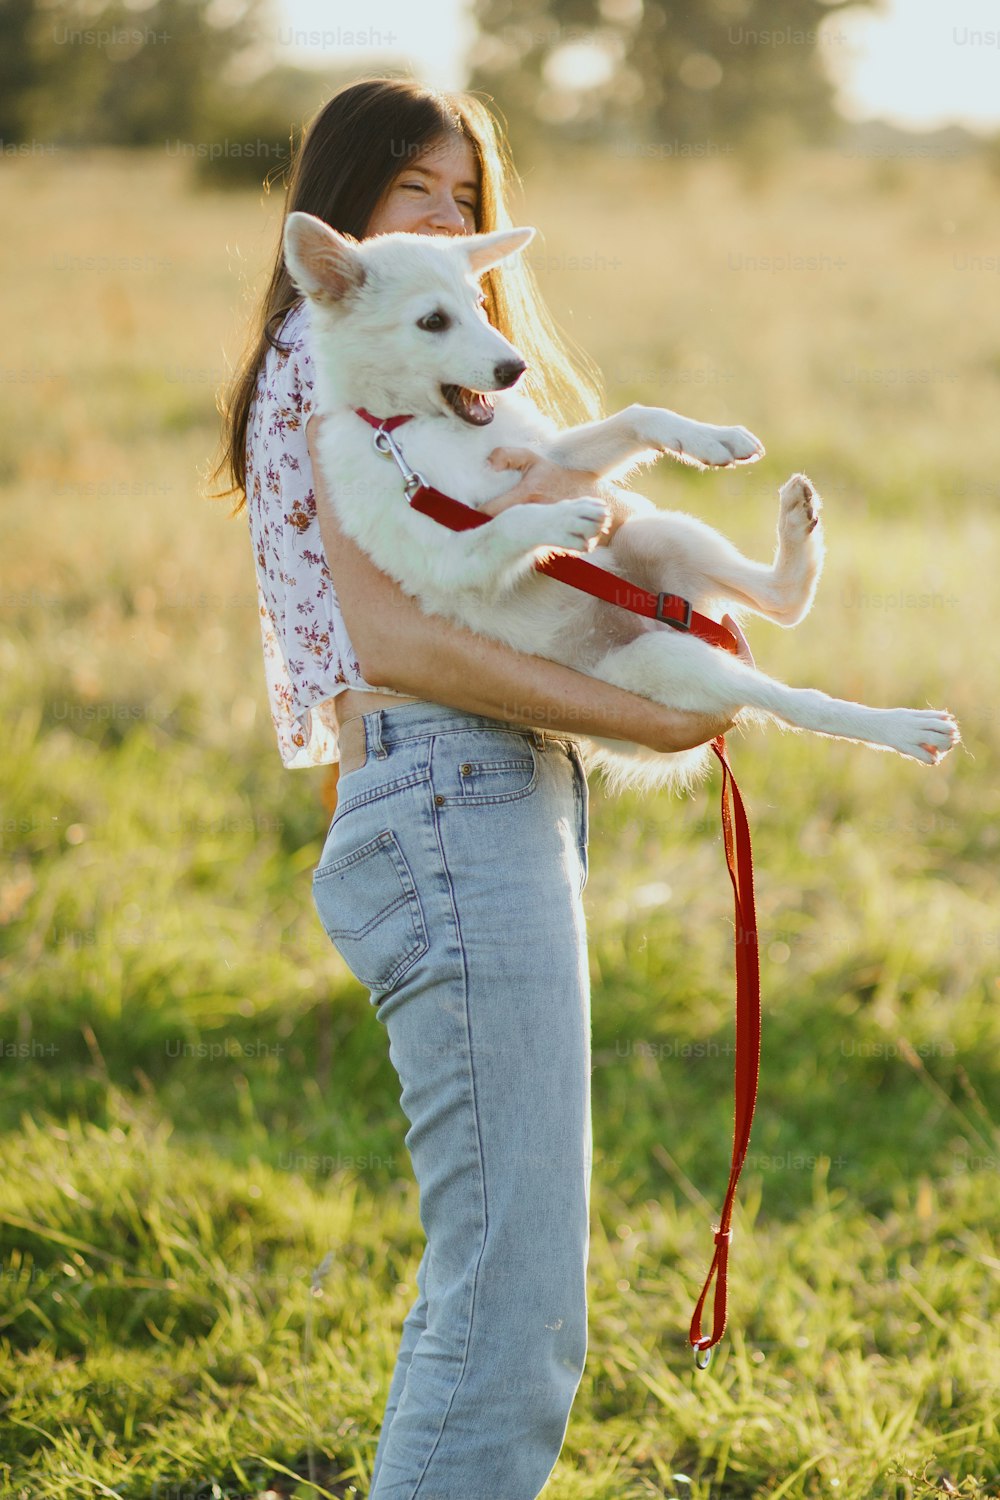 Stylish happy woman playing with cute white puppy in warm sunset light in summer meadow. Casual young female laughing and holding crazy active swiss shepherd puppy. Funny moments